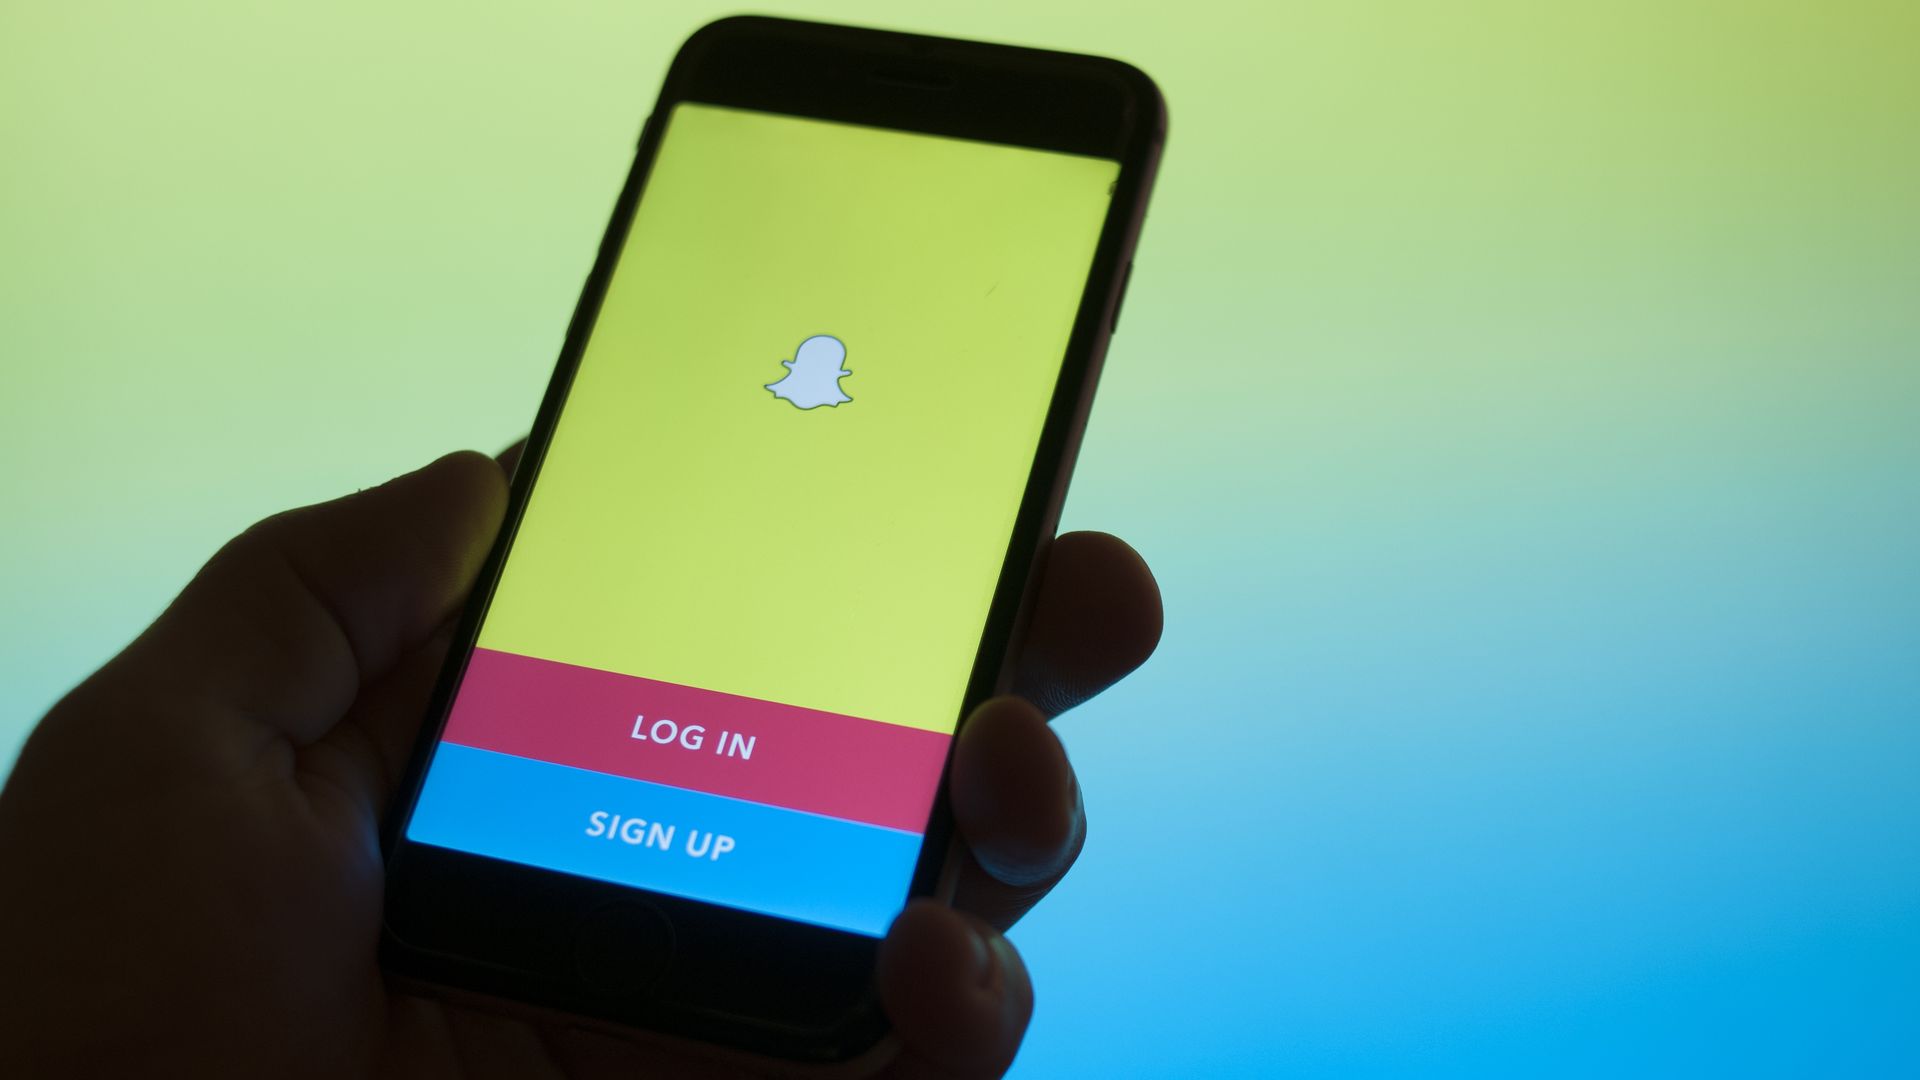 The Snapchat image messaging and multimedia application is seen on an iPhone 